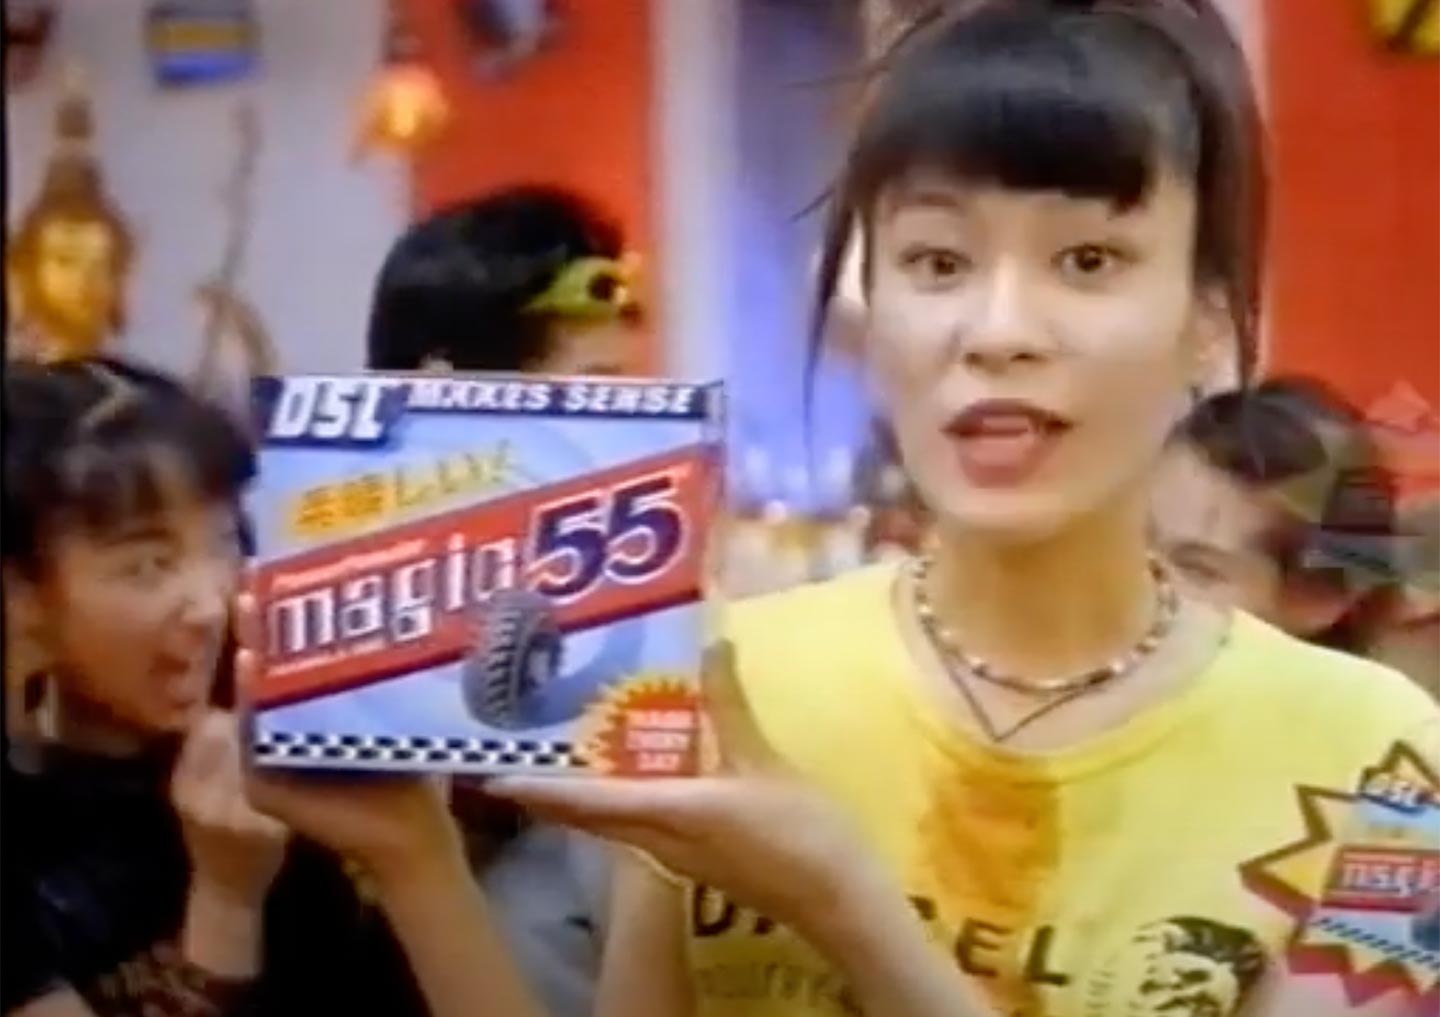 ‘Magic 55’, a ‘94 commercial aired on Rai and Mediaset programming. Entirely in Japanese, it featured a detergent called “Magic 55”  that transforms any piece of clothing into a Diesel garment